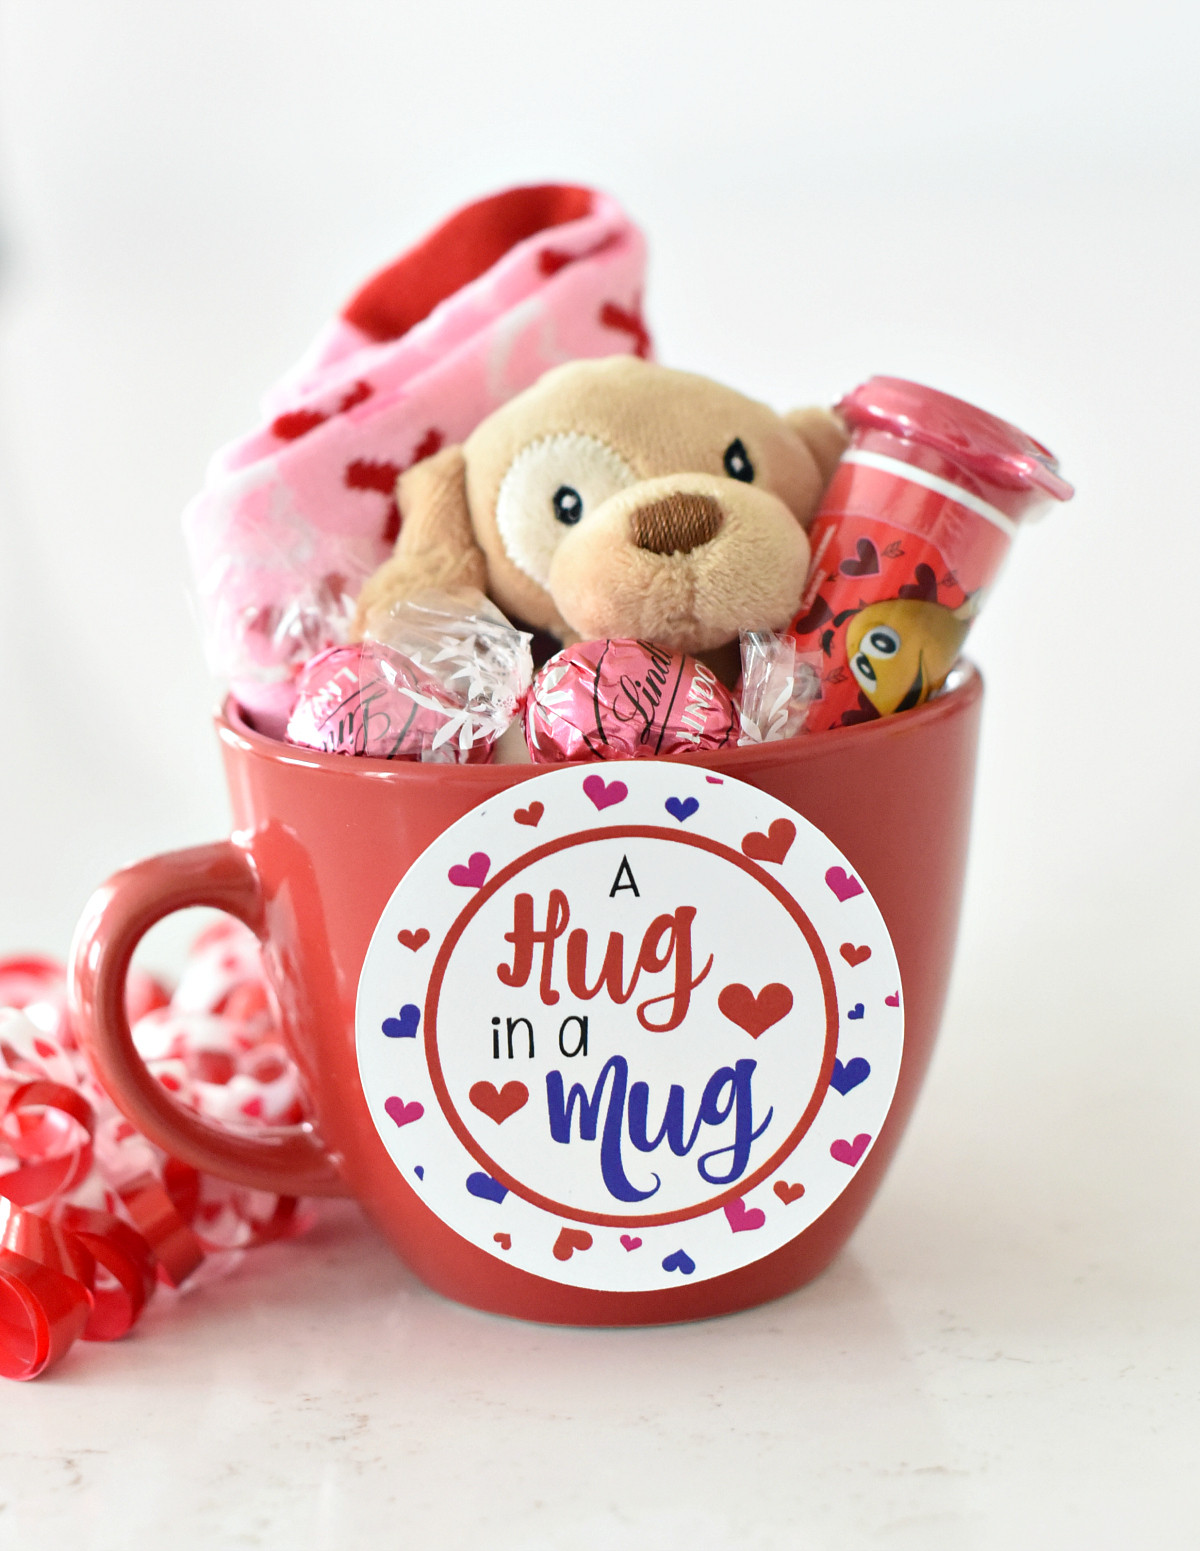 Valentine S Gift Ideas
 Cute Valentine s Day Gift Idea RED iculous Basket